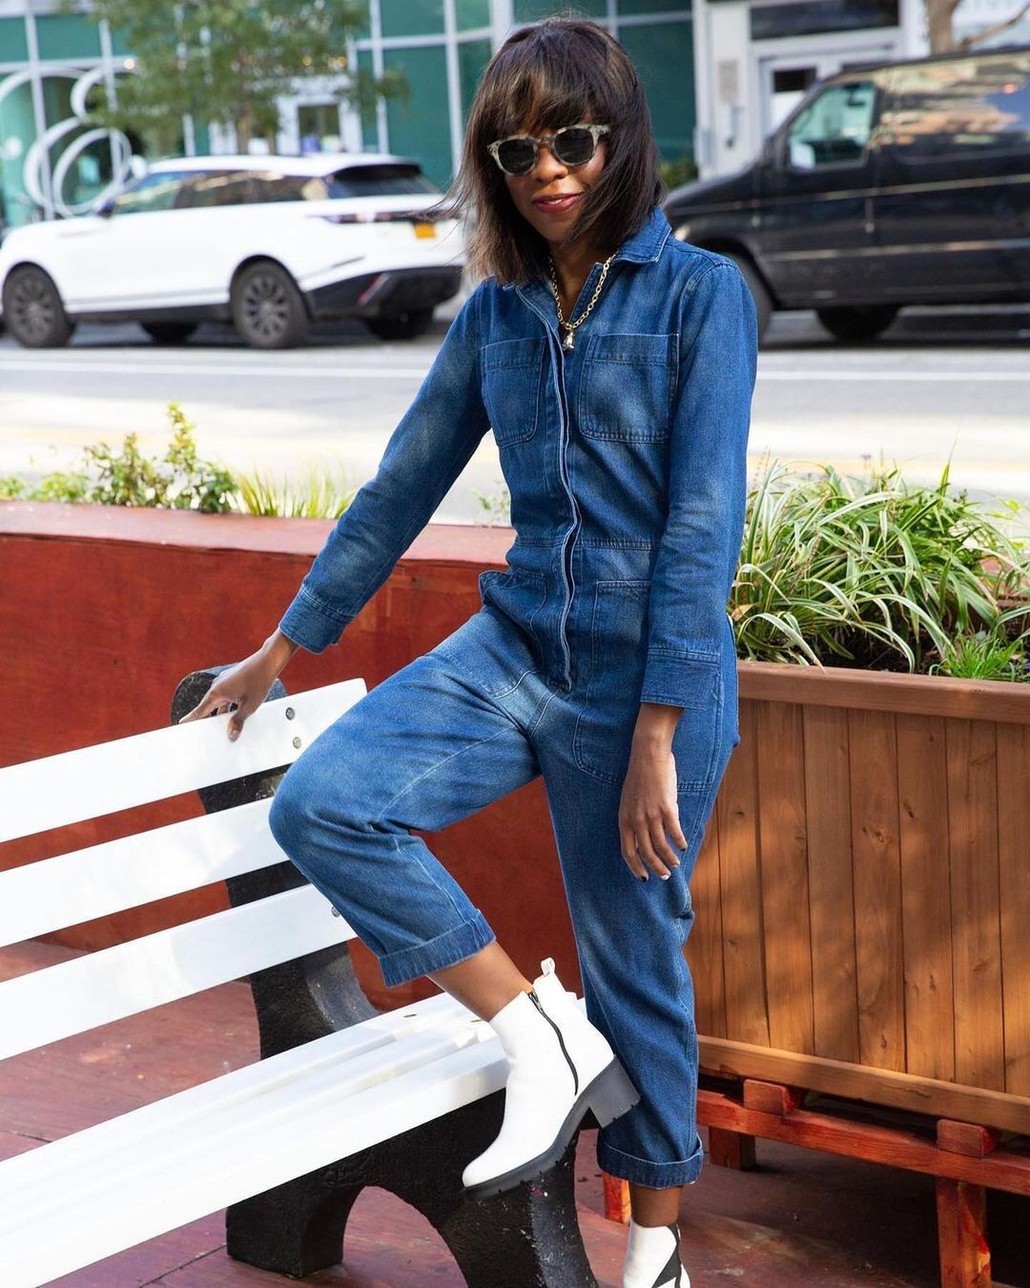 How to Style: Women's Utility Coveralls